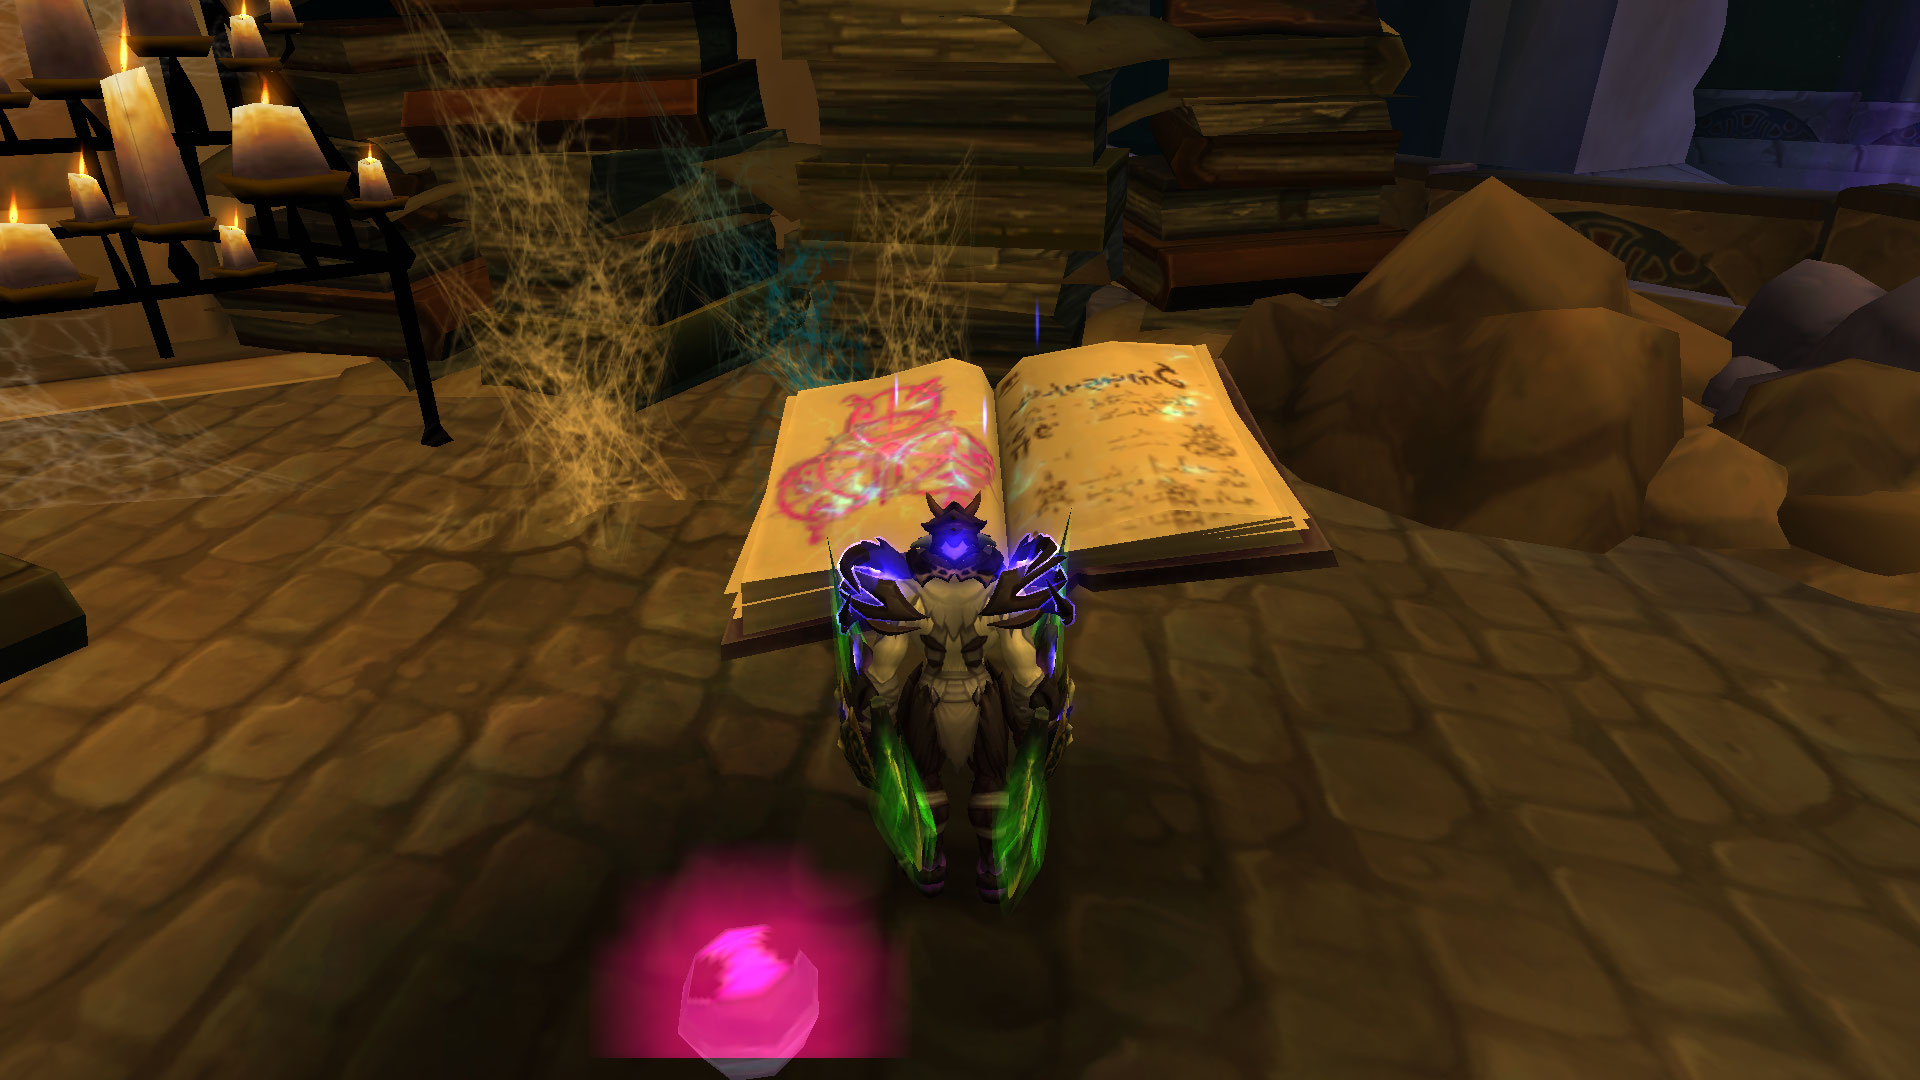 WoW the night elf is reading a huge book